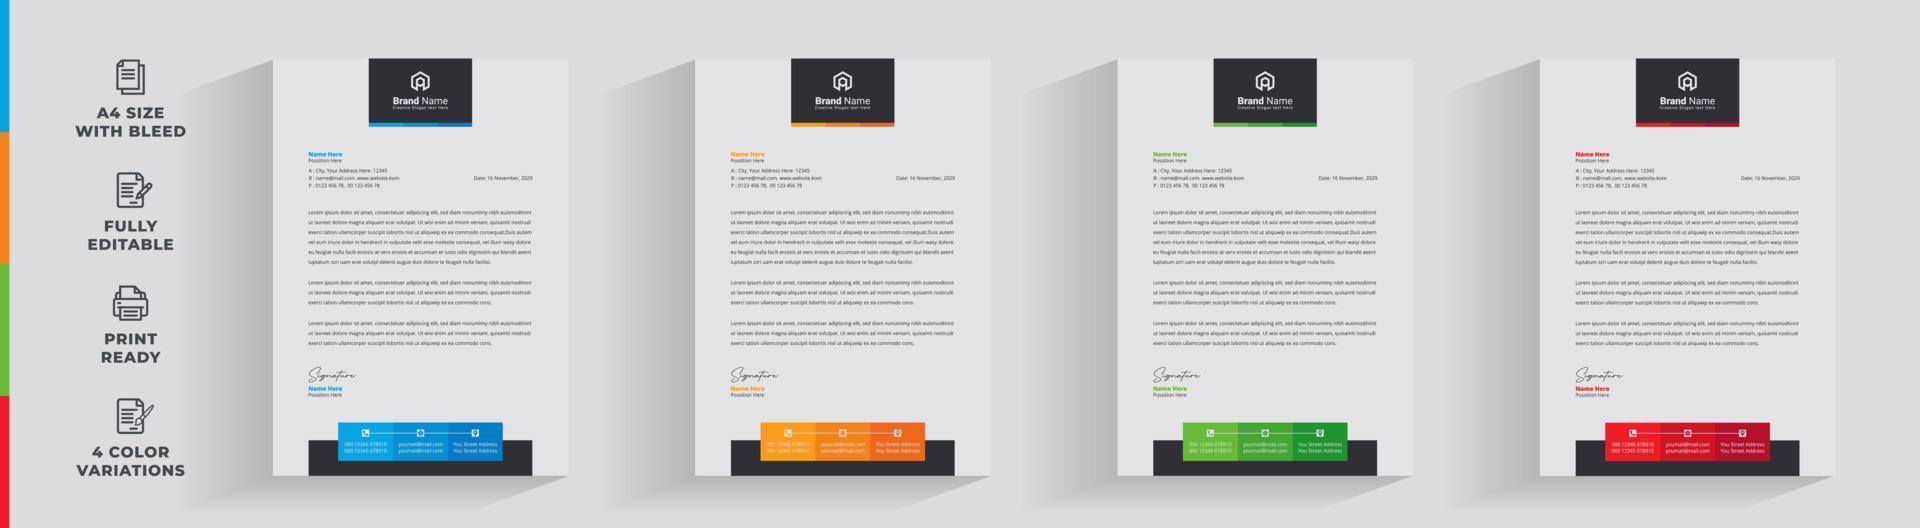 letterhead corporate A4 size minimal clean creative informative abstract business company design template vector